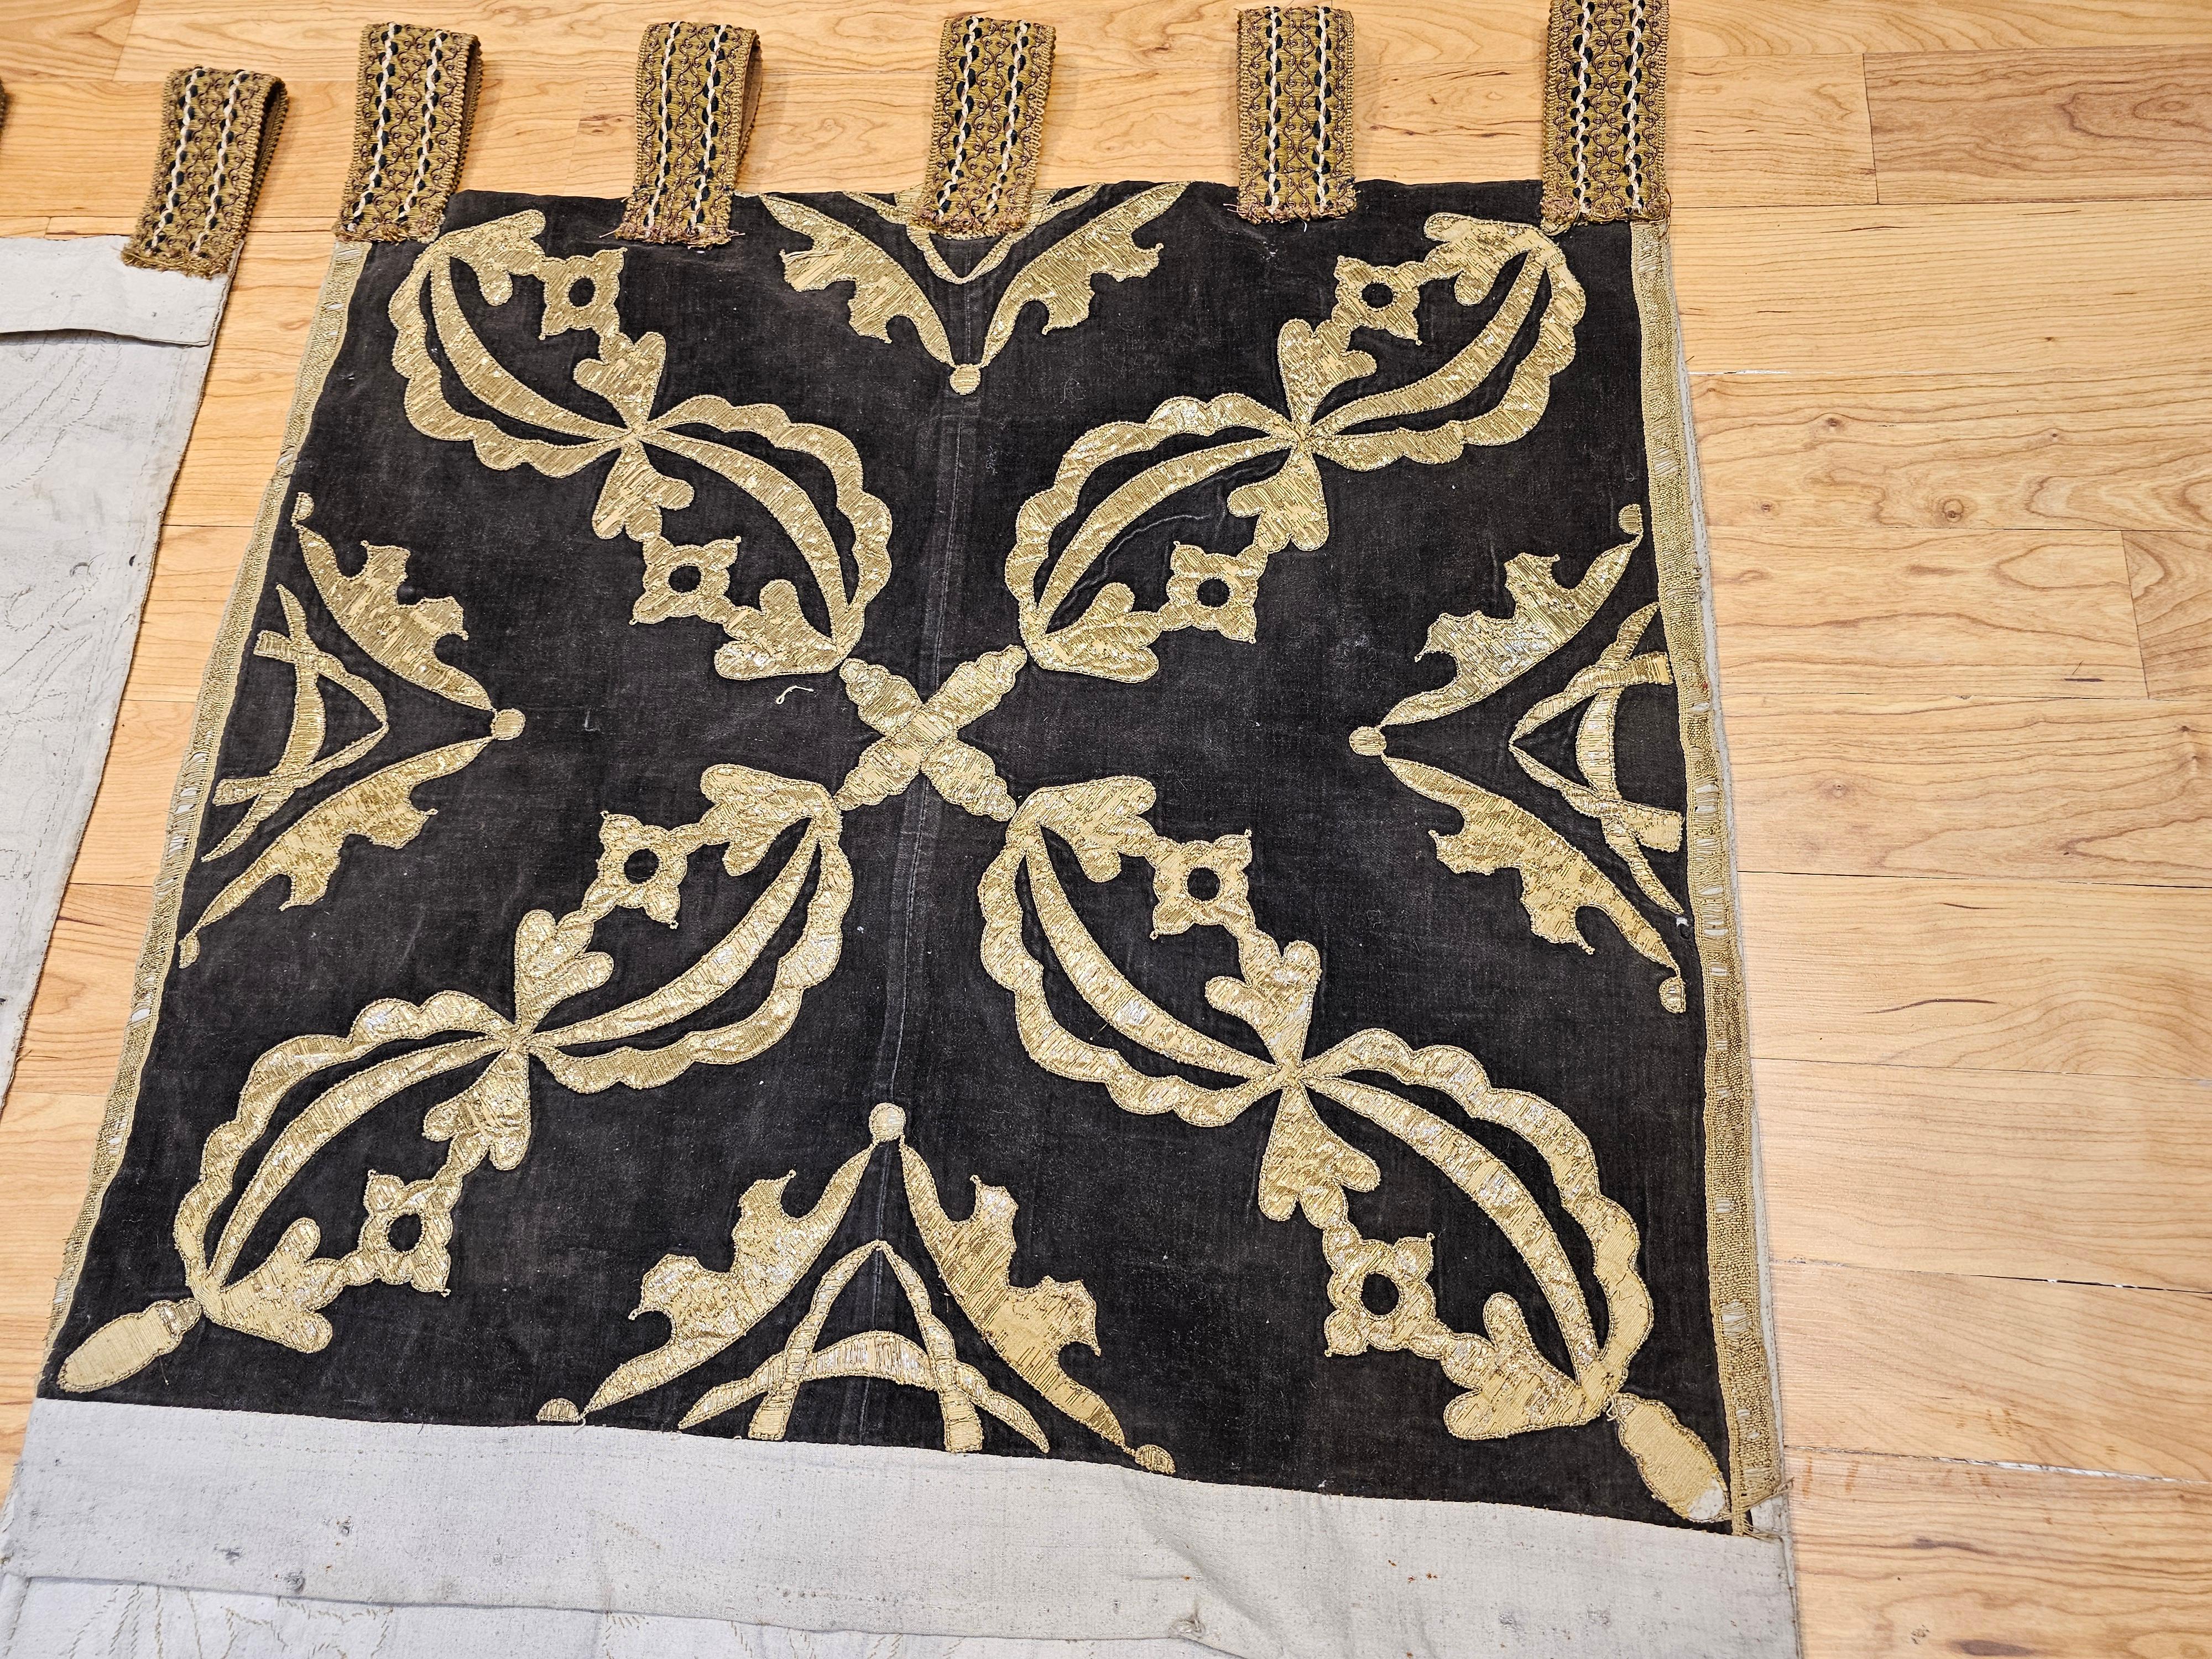 18th Century Ottoman Gilt Threads Brocade Embroidery Textile Panels (A Pair) For Sale 12